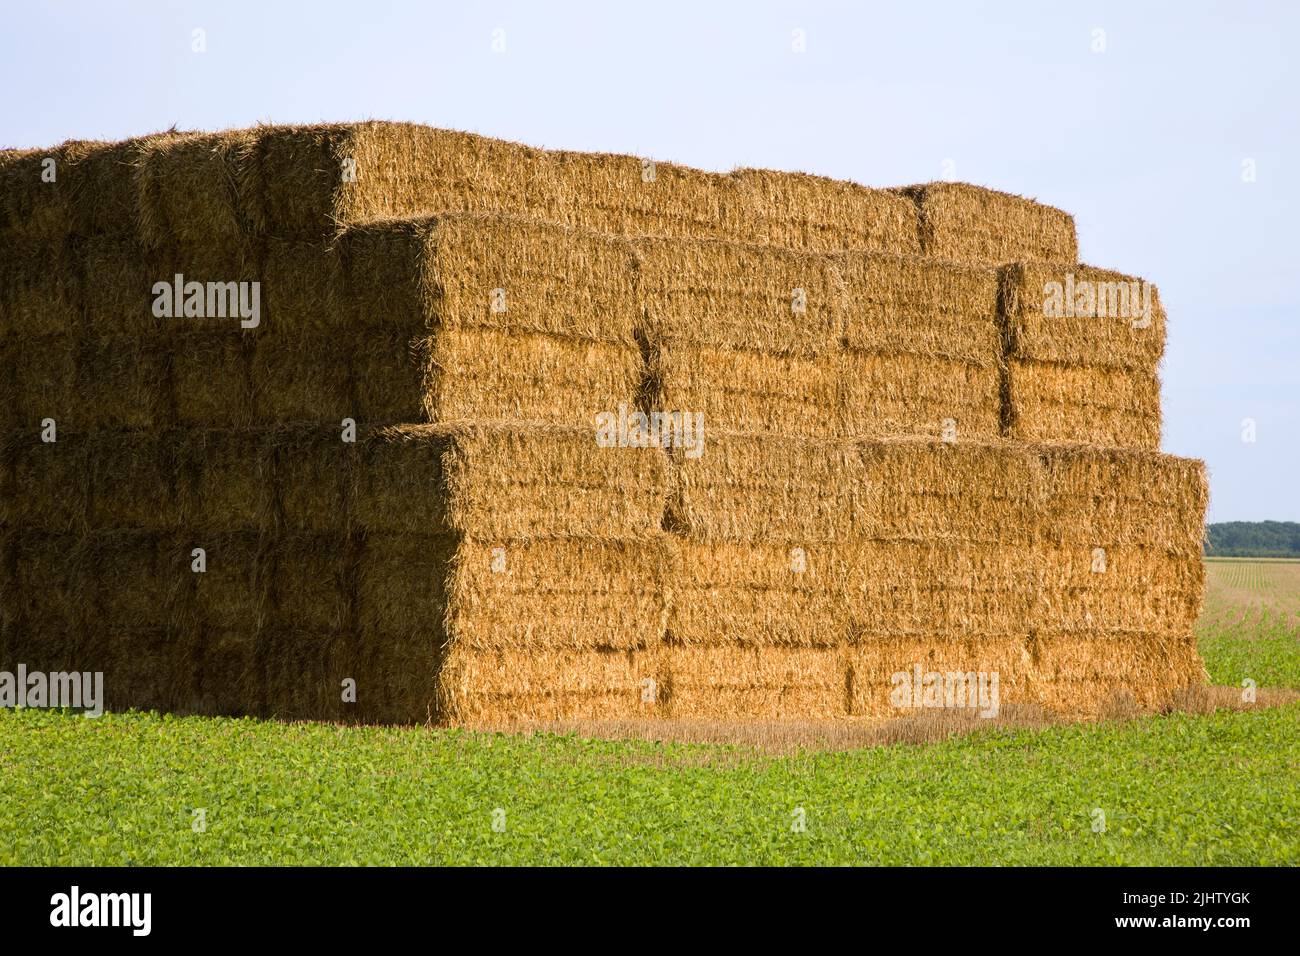 Stack of Rectangular Hay Bales of dry straw in a field outdoors. Stock Photo